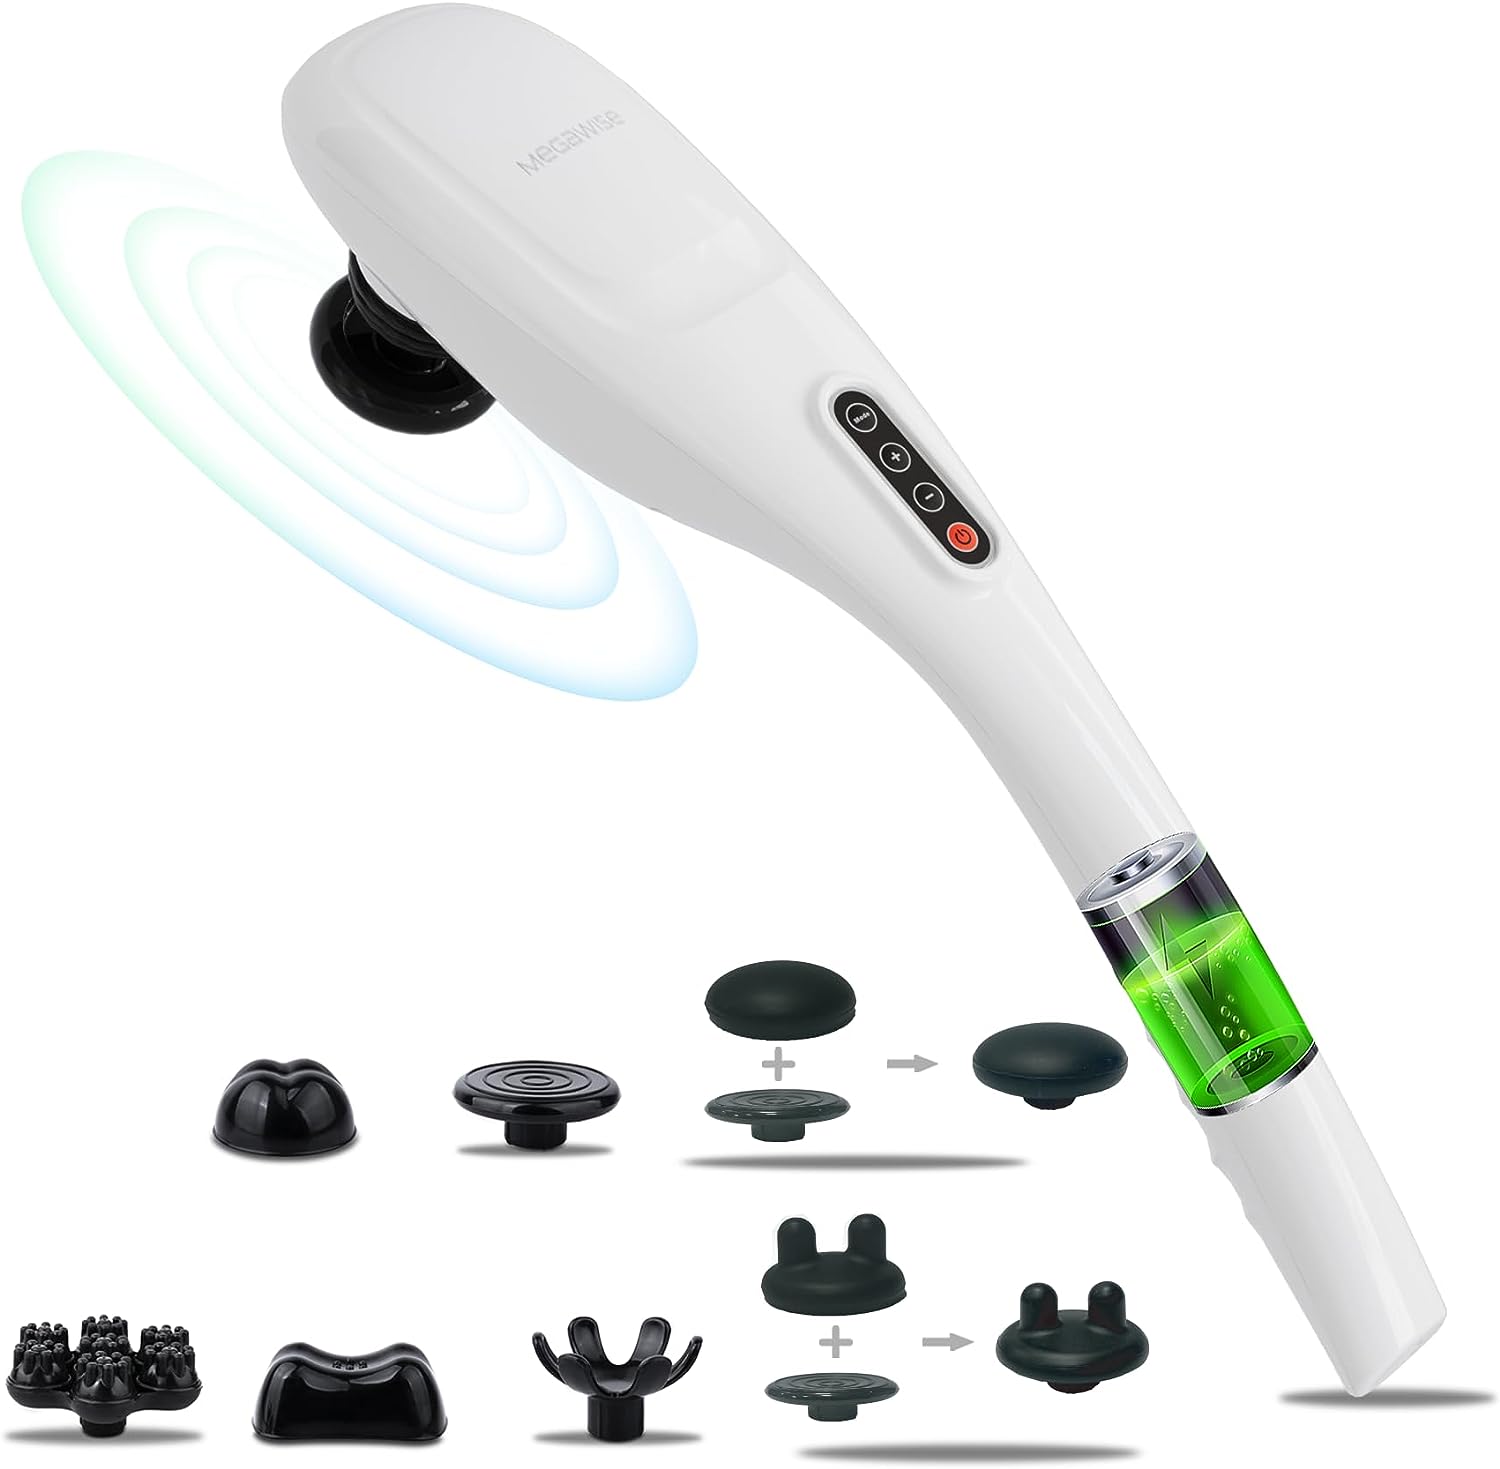 MEGAWISE Handheld Back Massager | Deep Tissue Percussion Massage for Back, Neck, Shoulders, Waist and Legs (Cordless Off-White)